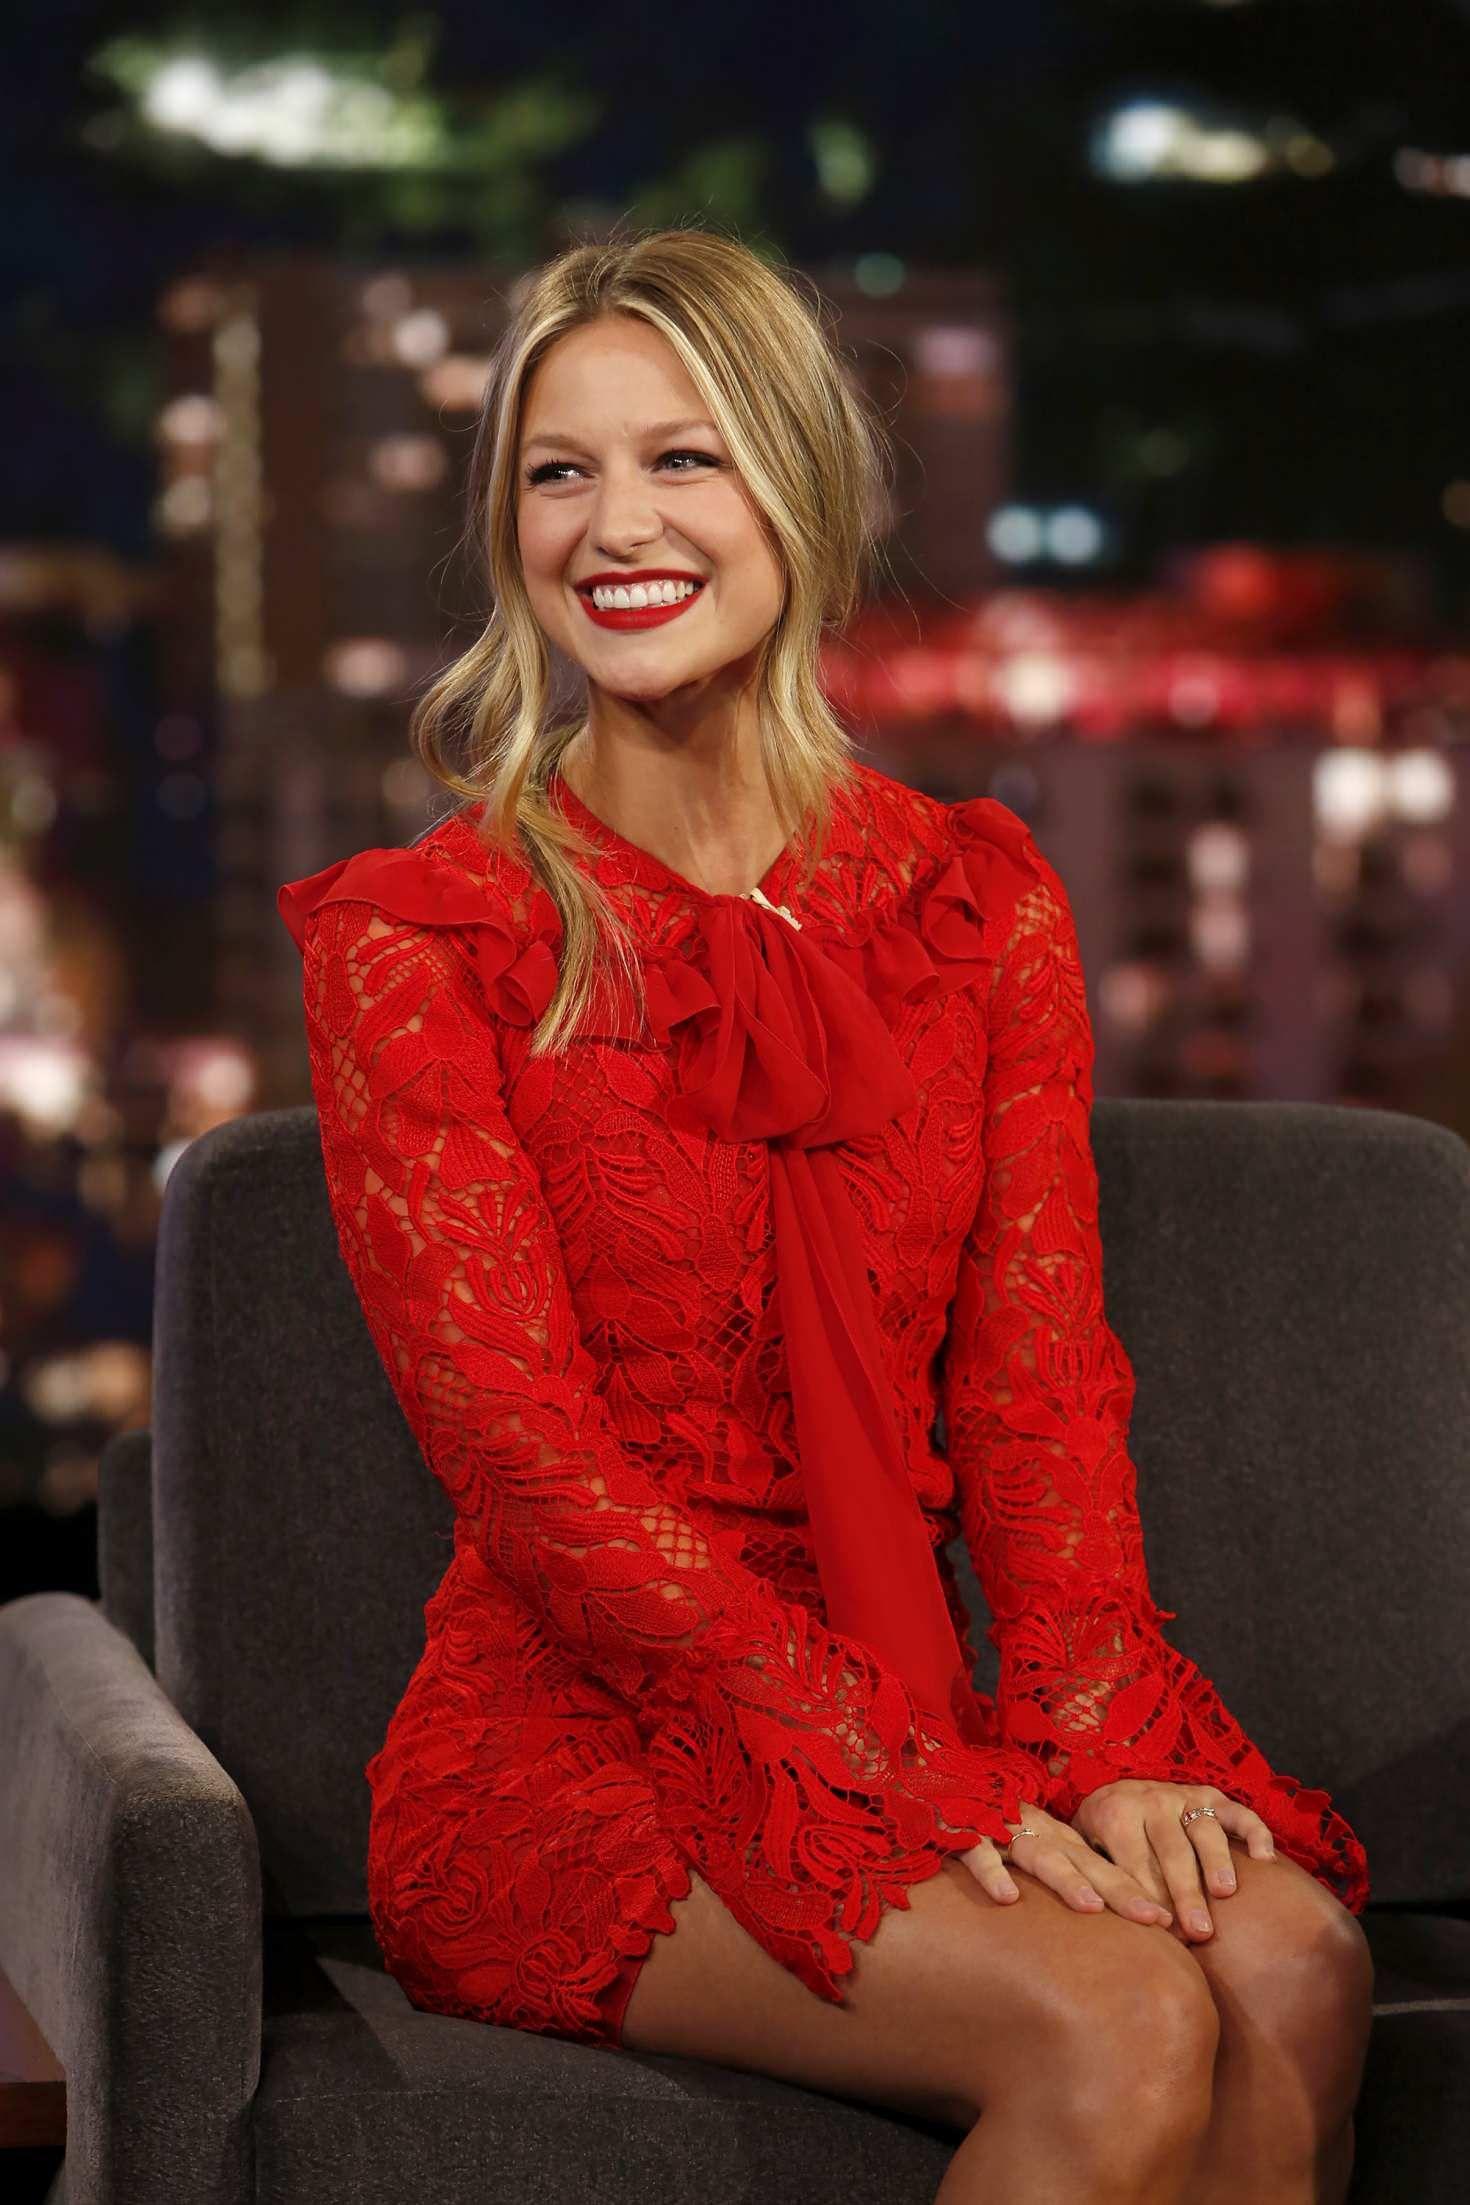 20 Hot Pictures of Melissa Benoist a.k.a Supergirl With Interesting Facts About Her | Best Of Comic Books